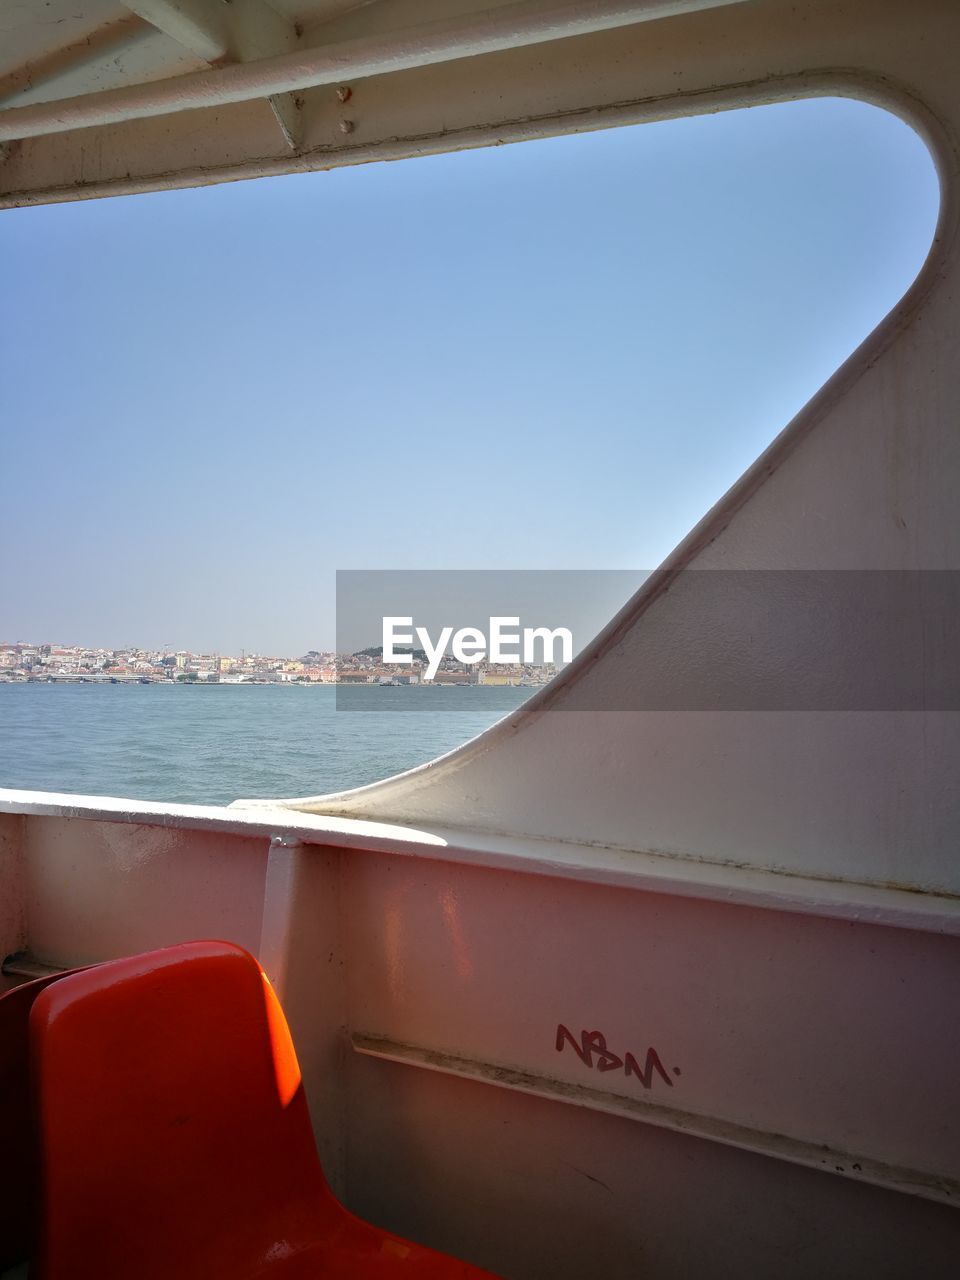 SCENIC VIEW OF SEA AGAINST CLEAR SKY SEEN THROUGH WINDOW